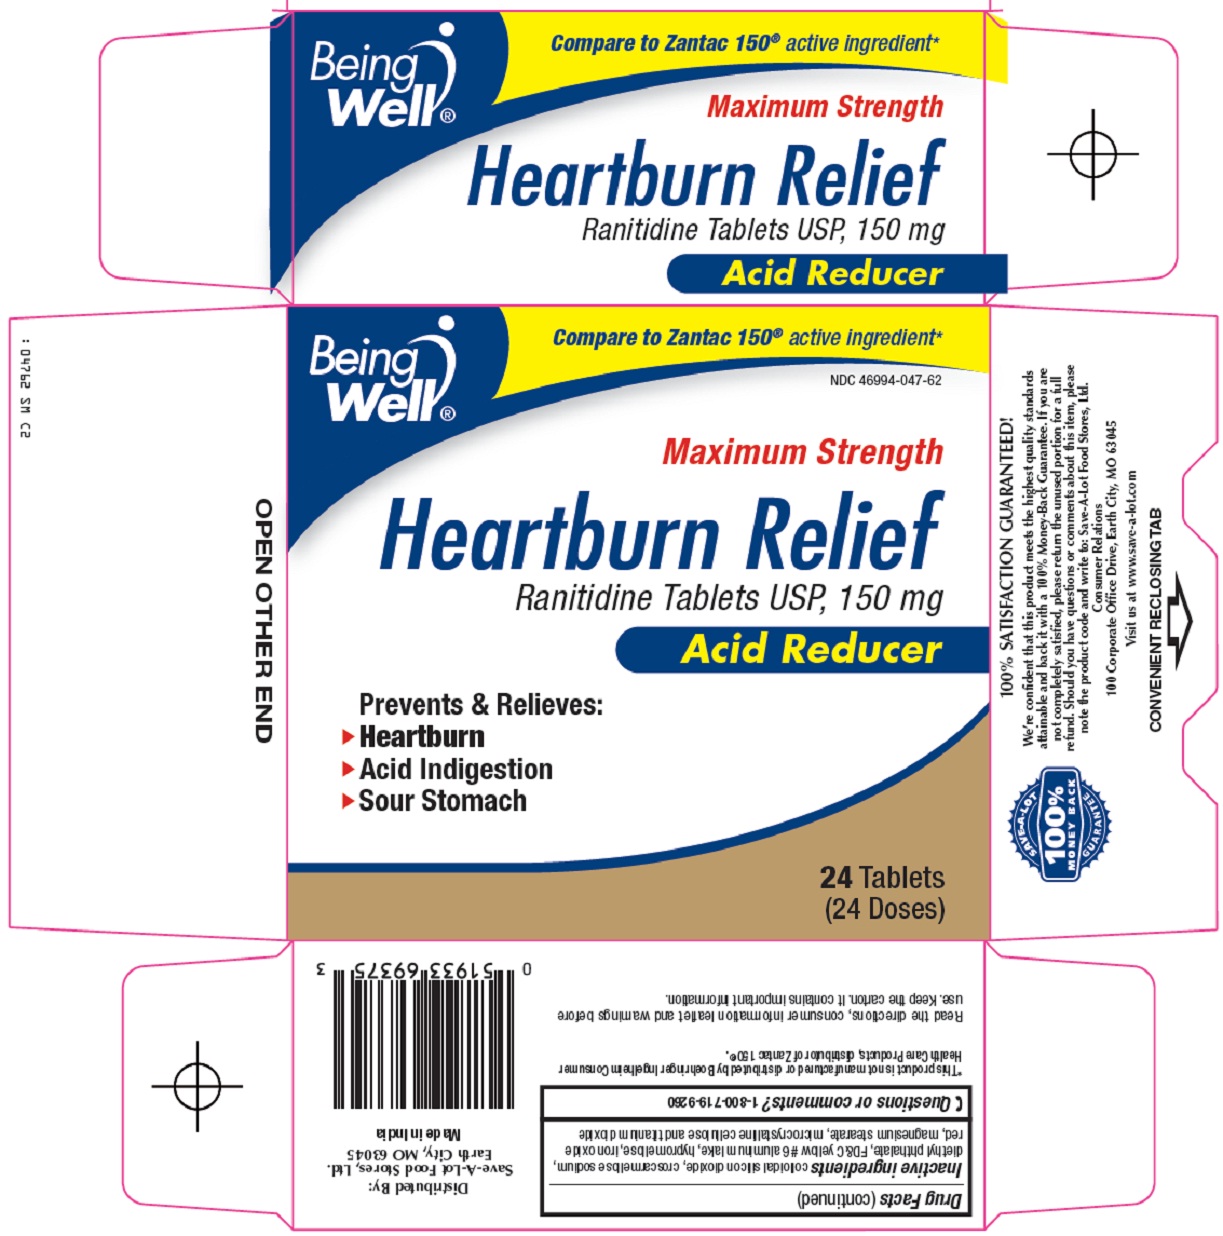 Being Well Heartburn Relief Image 1